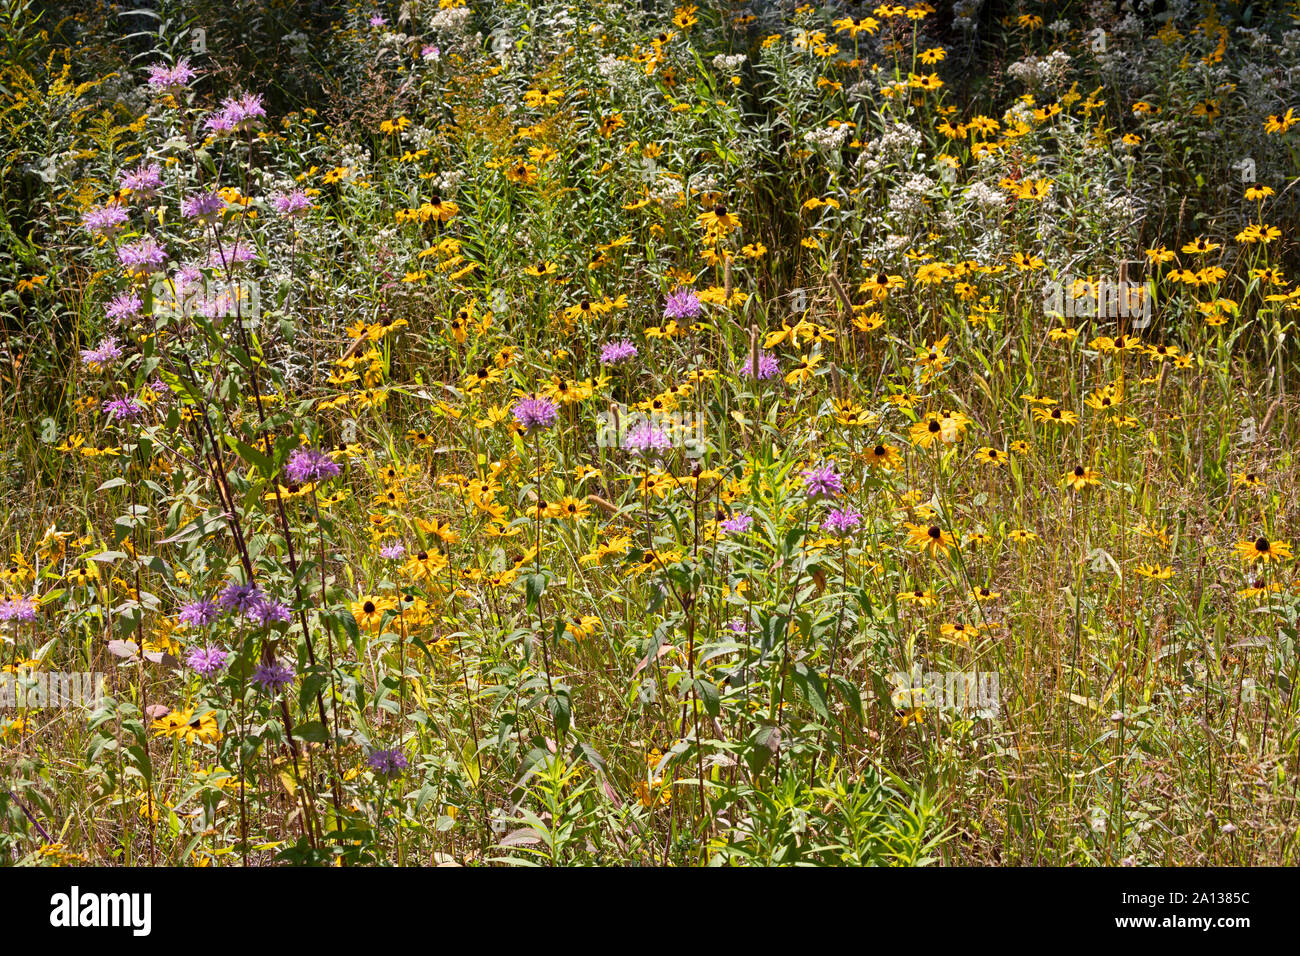 Wildflowers near the Trans Canada Highway, Northern Ontario, Canada Stock Photo